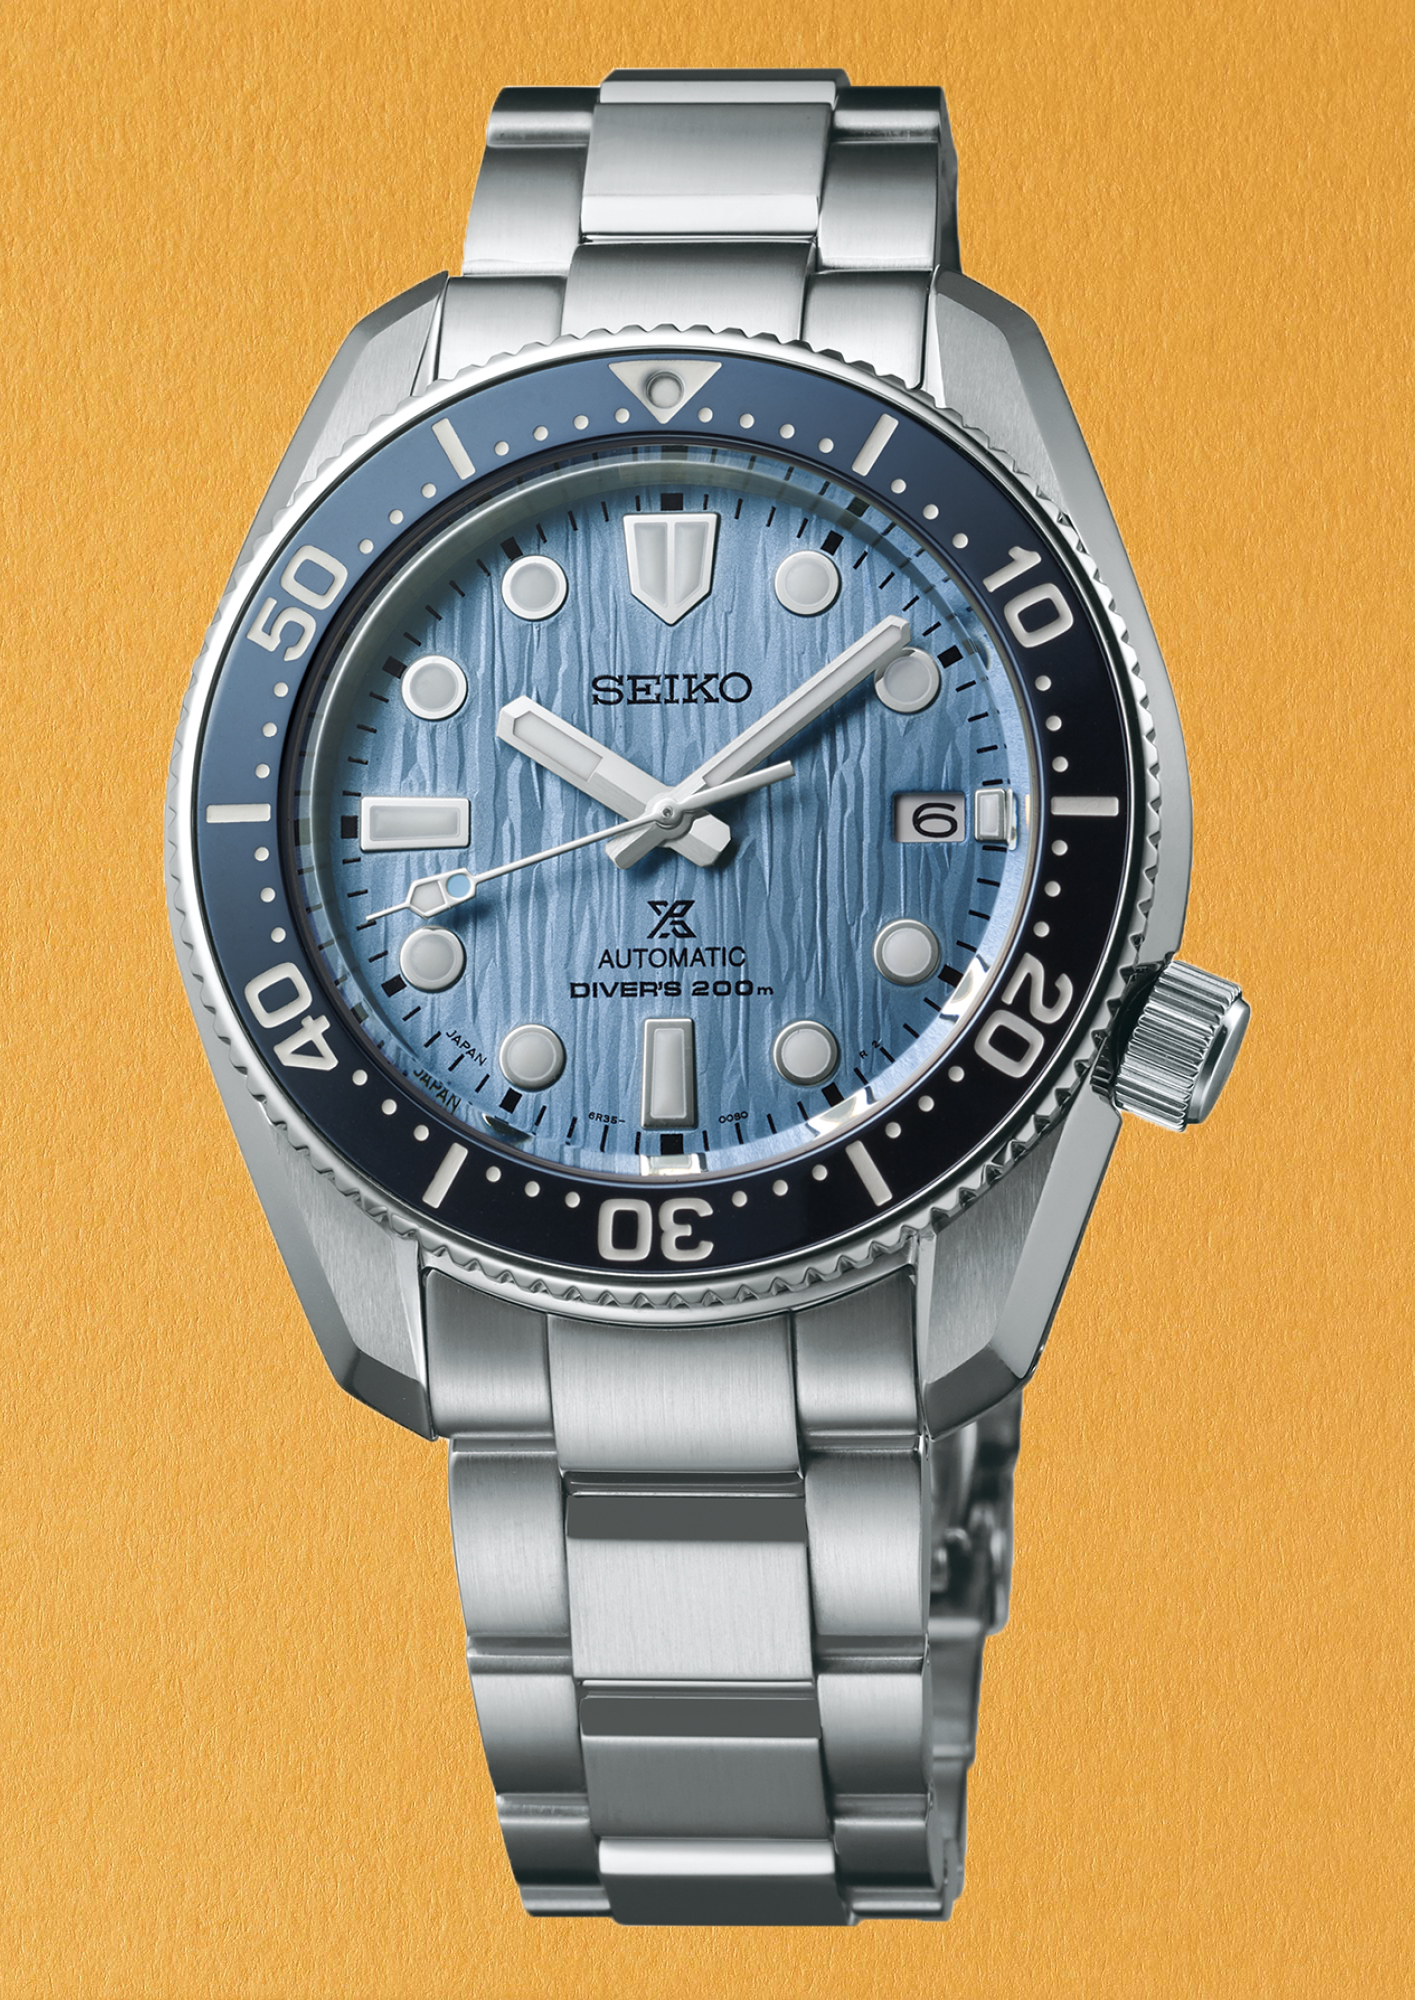 Ice cool: Seiko Prospex Glacier Save the Ocean Special Editions - Brummell